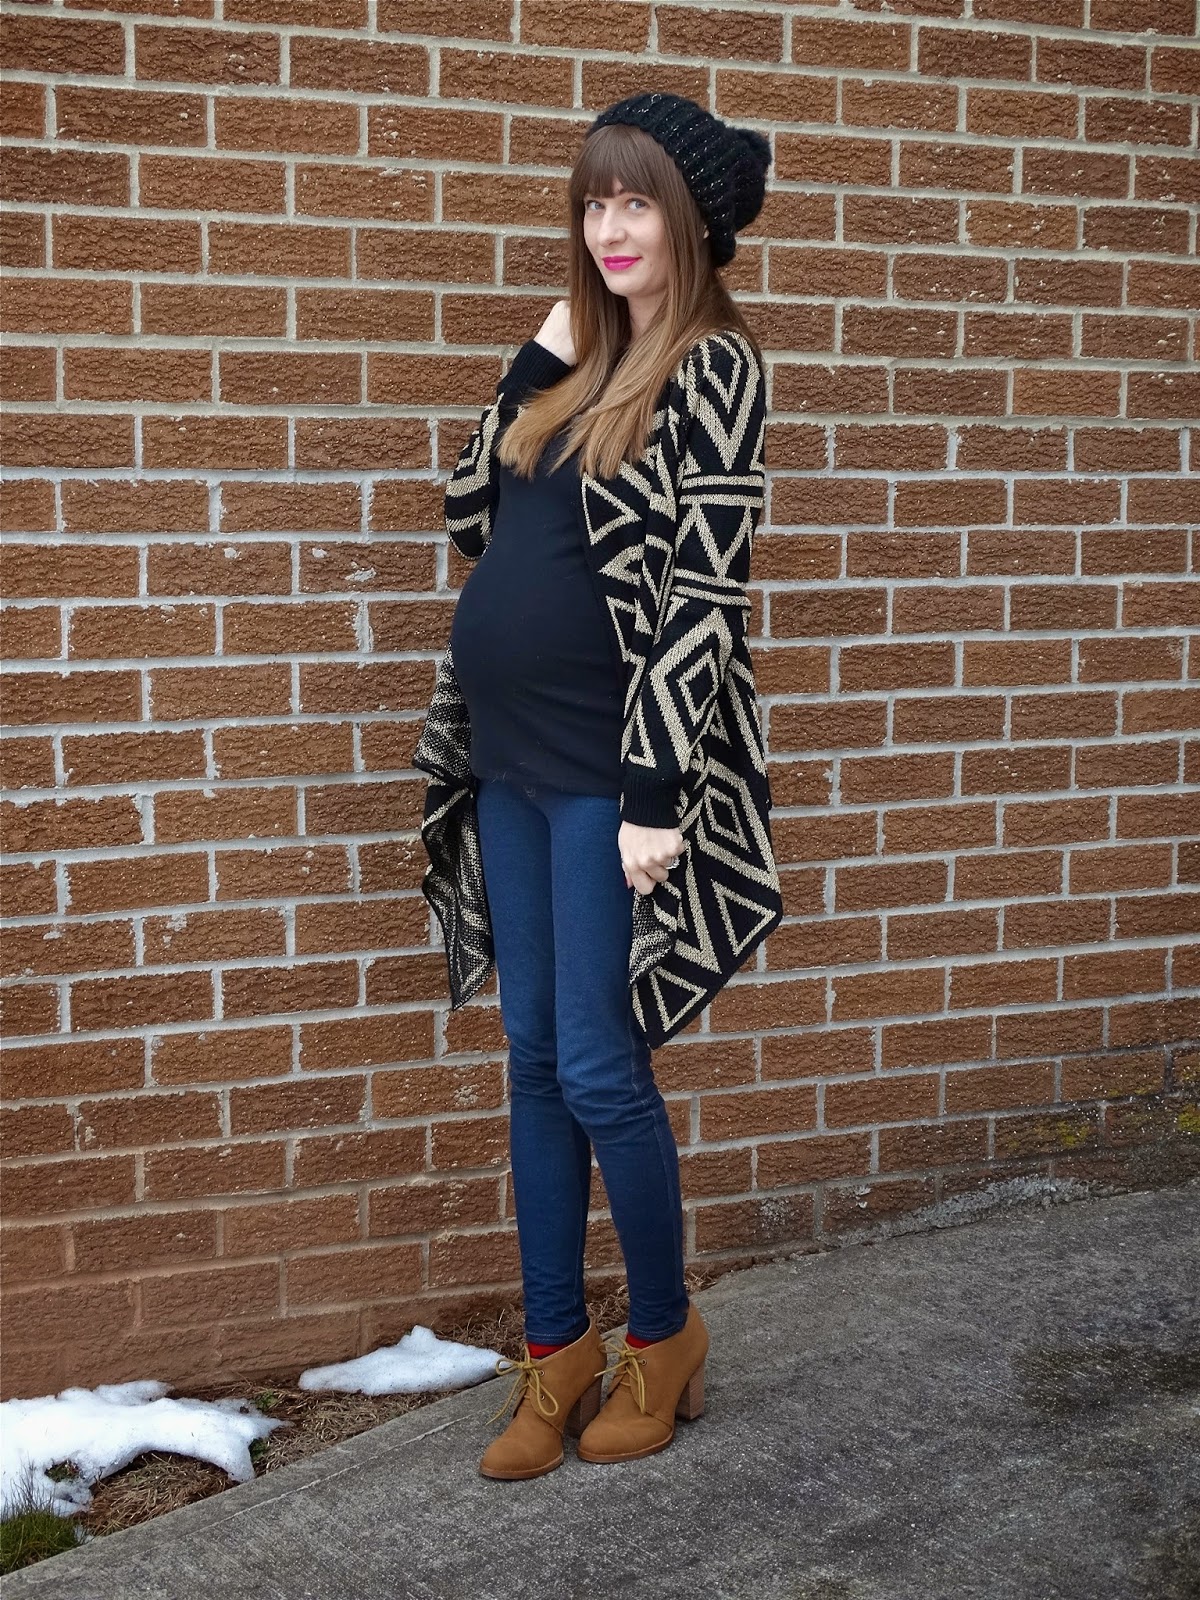 Pregnancy Style featuring Destination Maternity, Old Navy maternity | www.houseofjeffers.com